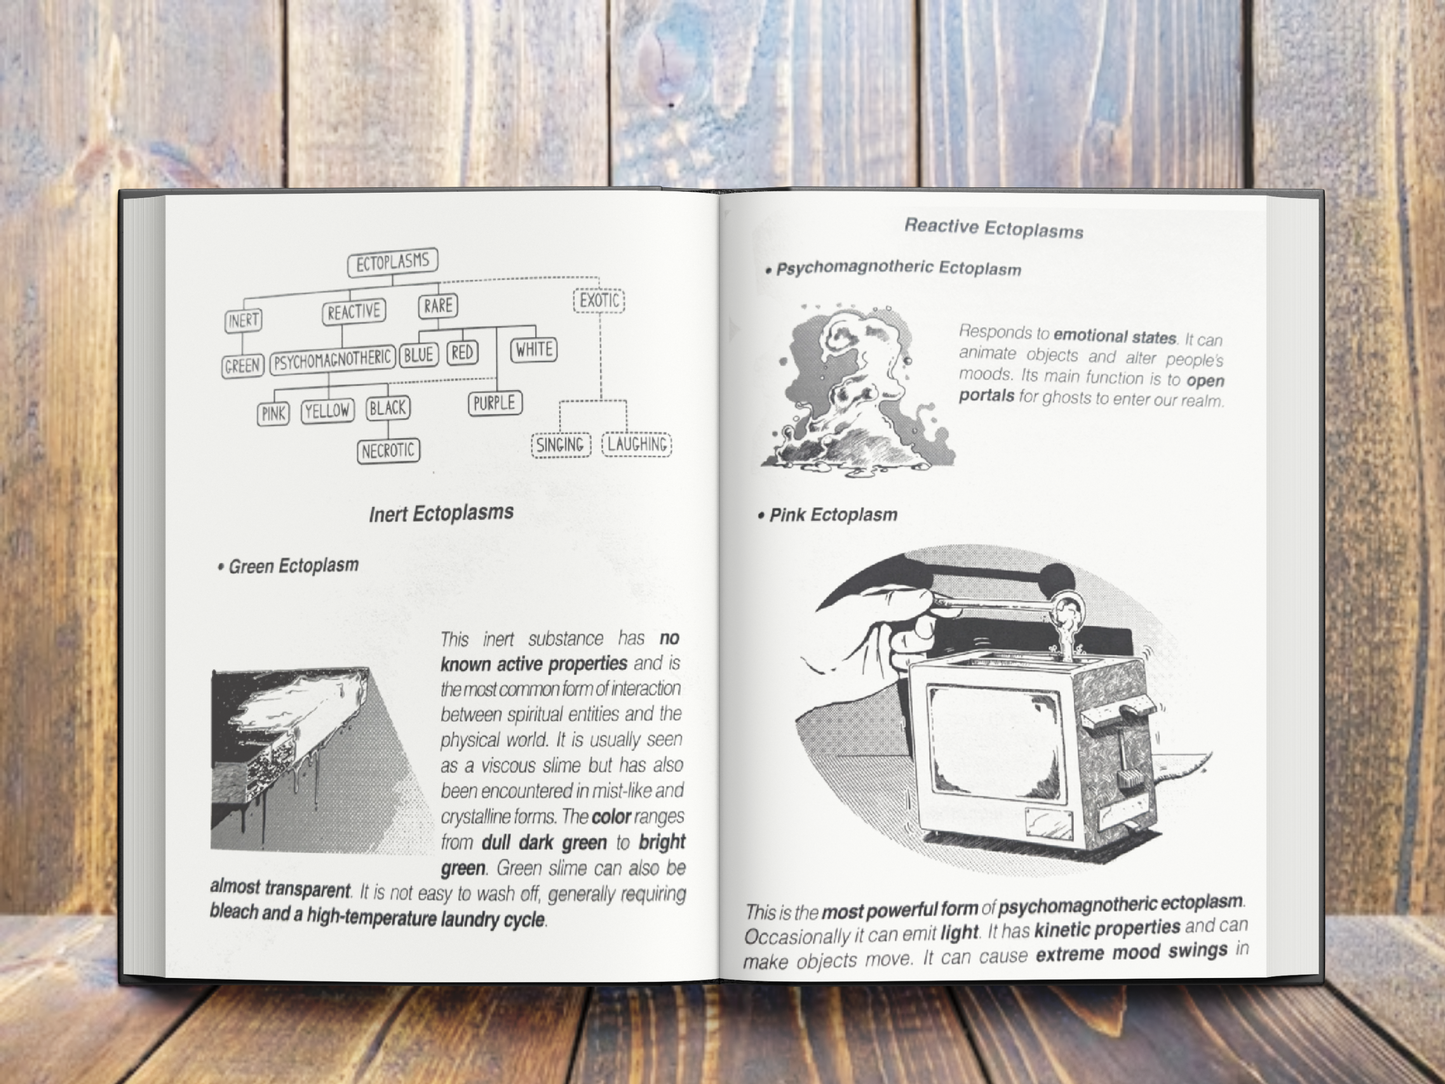 GHOSTBUSTERS EMPLOYEE HANDBOOK: Authentic In-Universe Hardback Collectible Exclusive Fan-Made